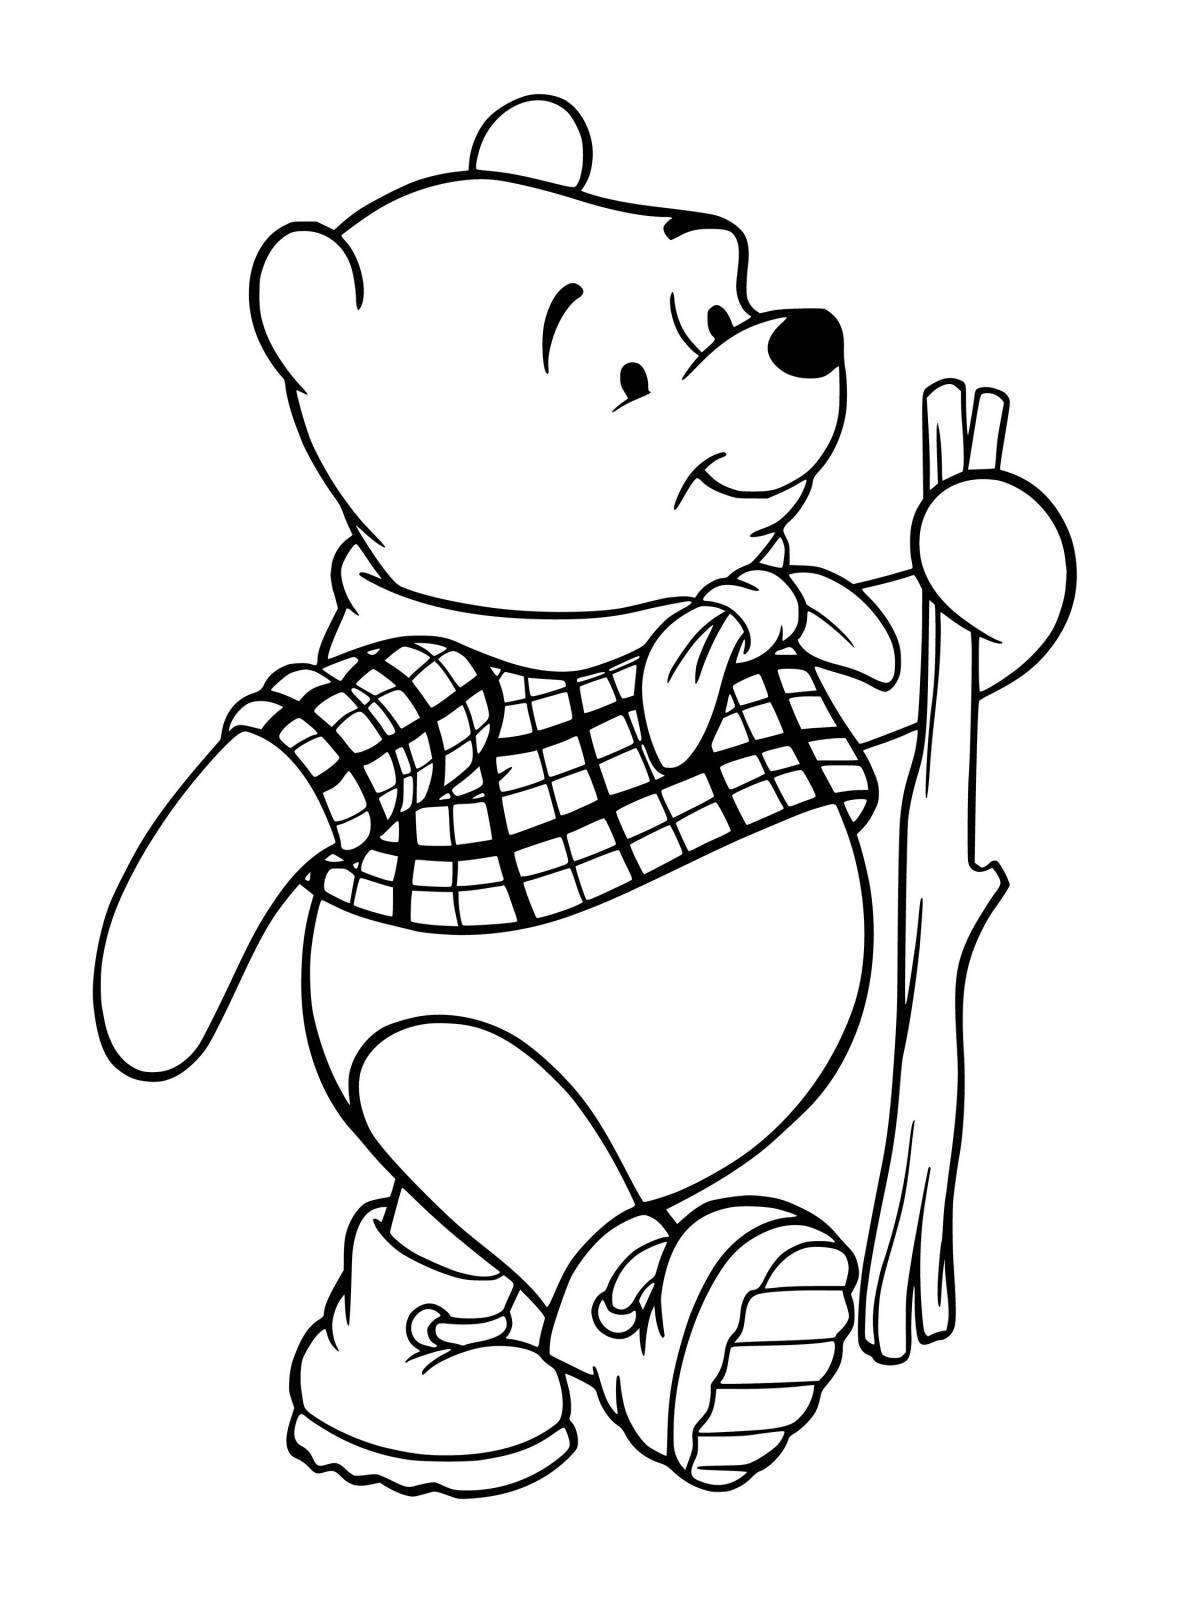 Vinnie's animated coloring page